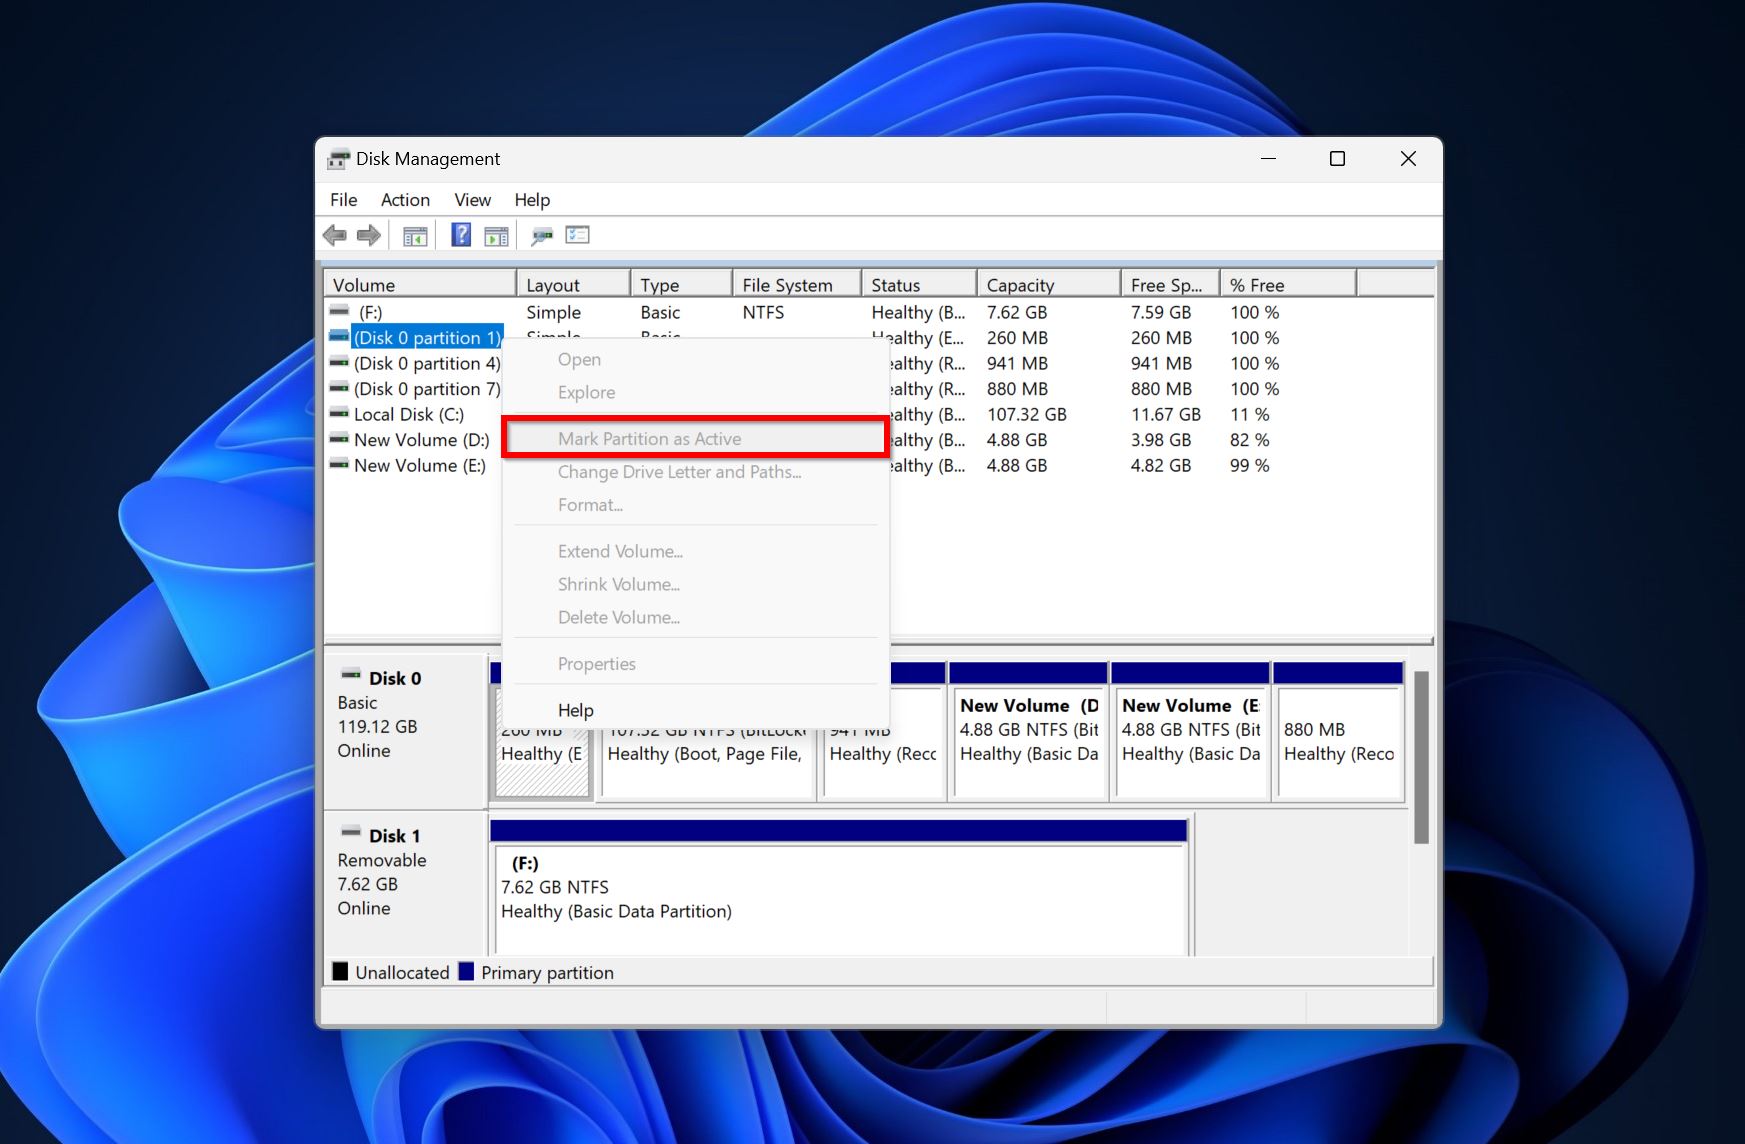 Mark partition as active.